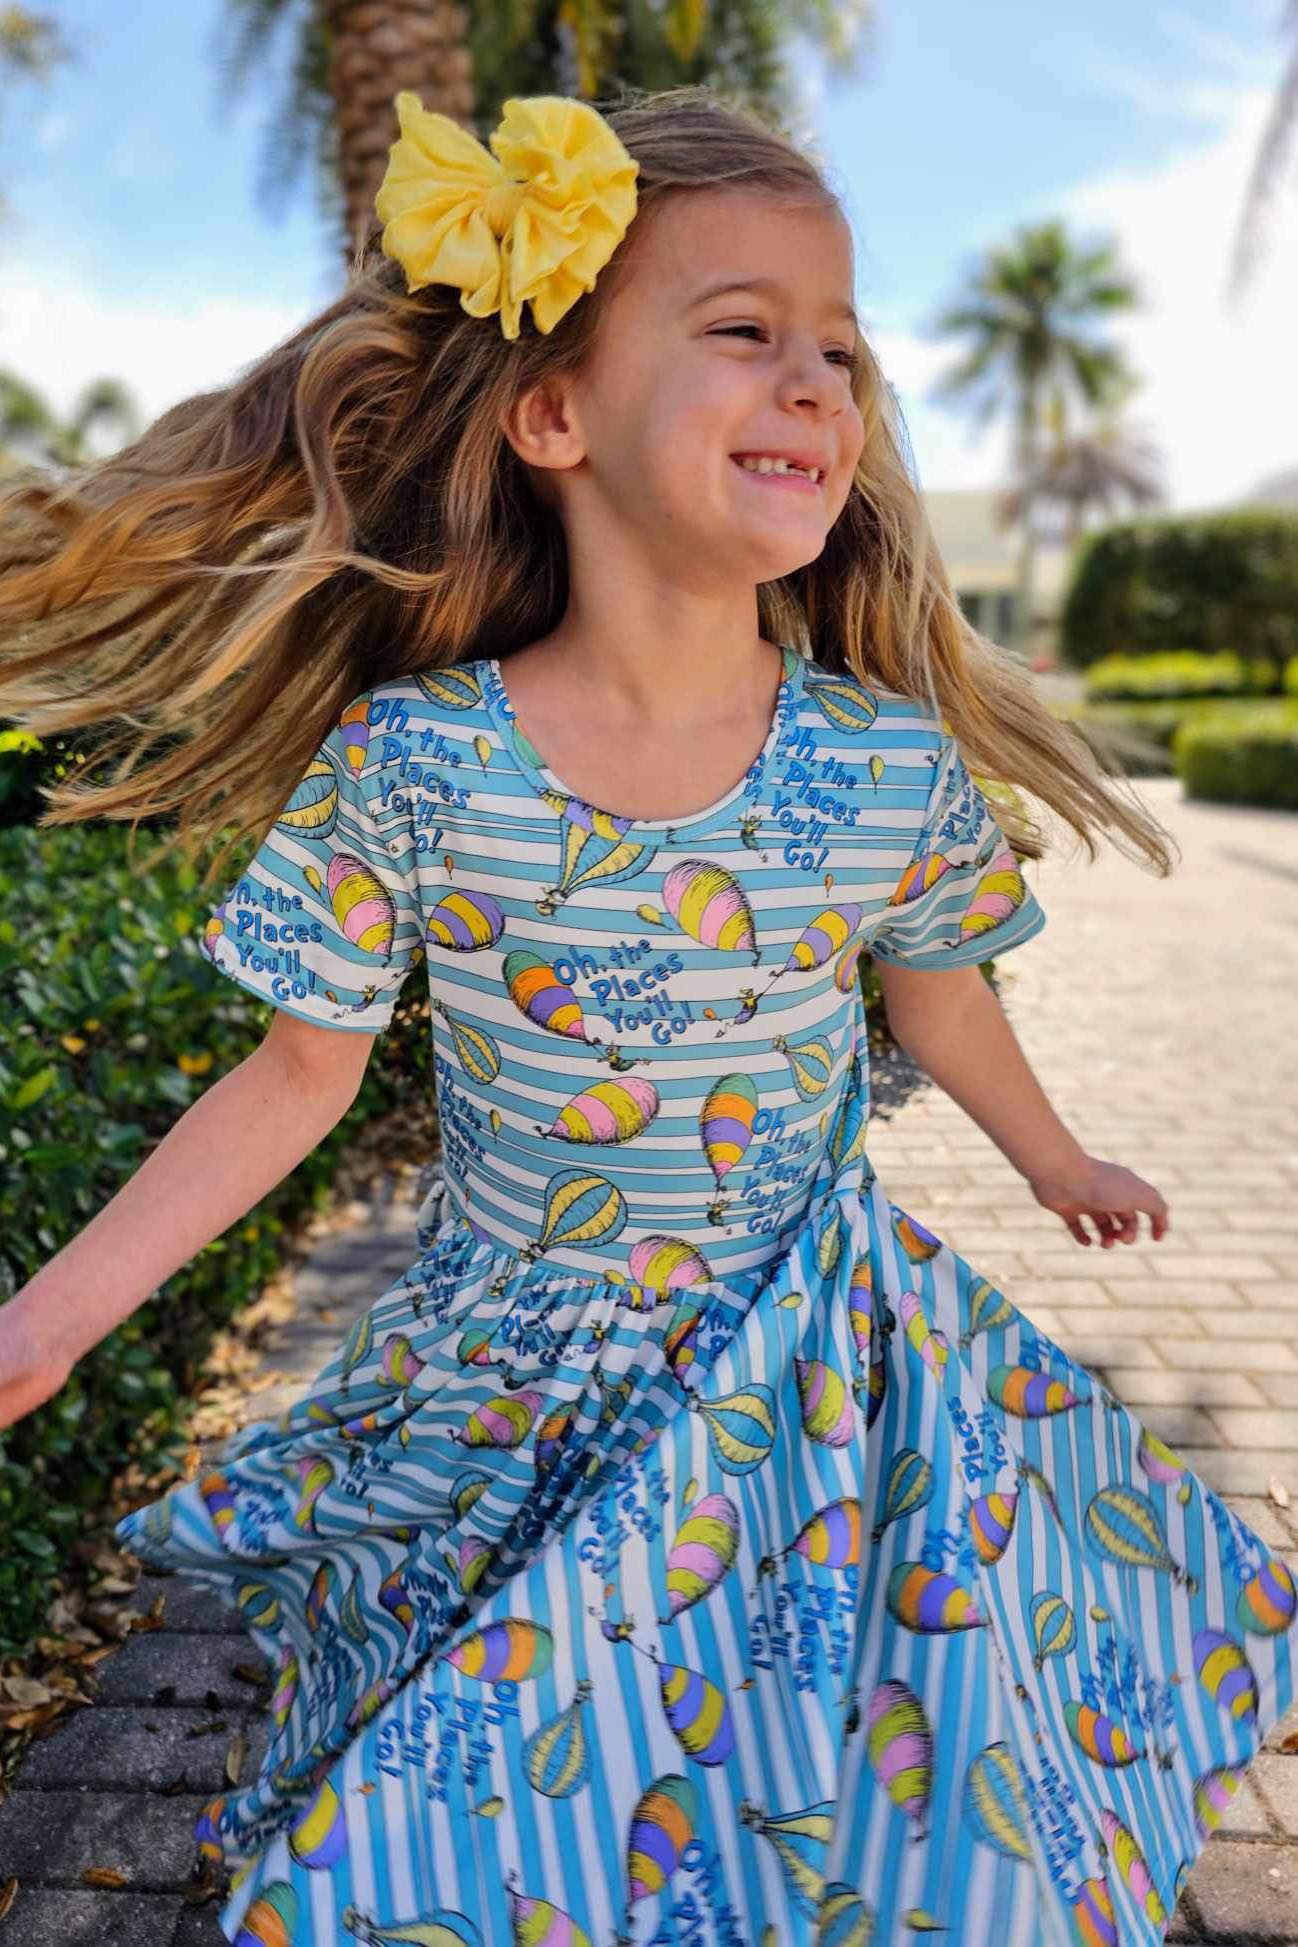 [Oh, The Places You'll Go] Teal Stripe Twirl Dress